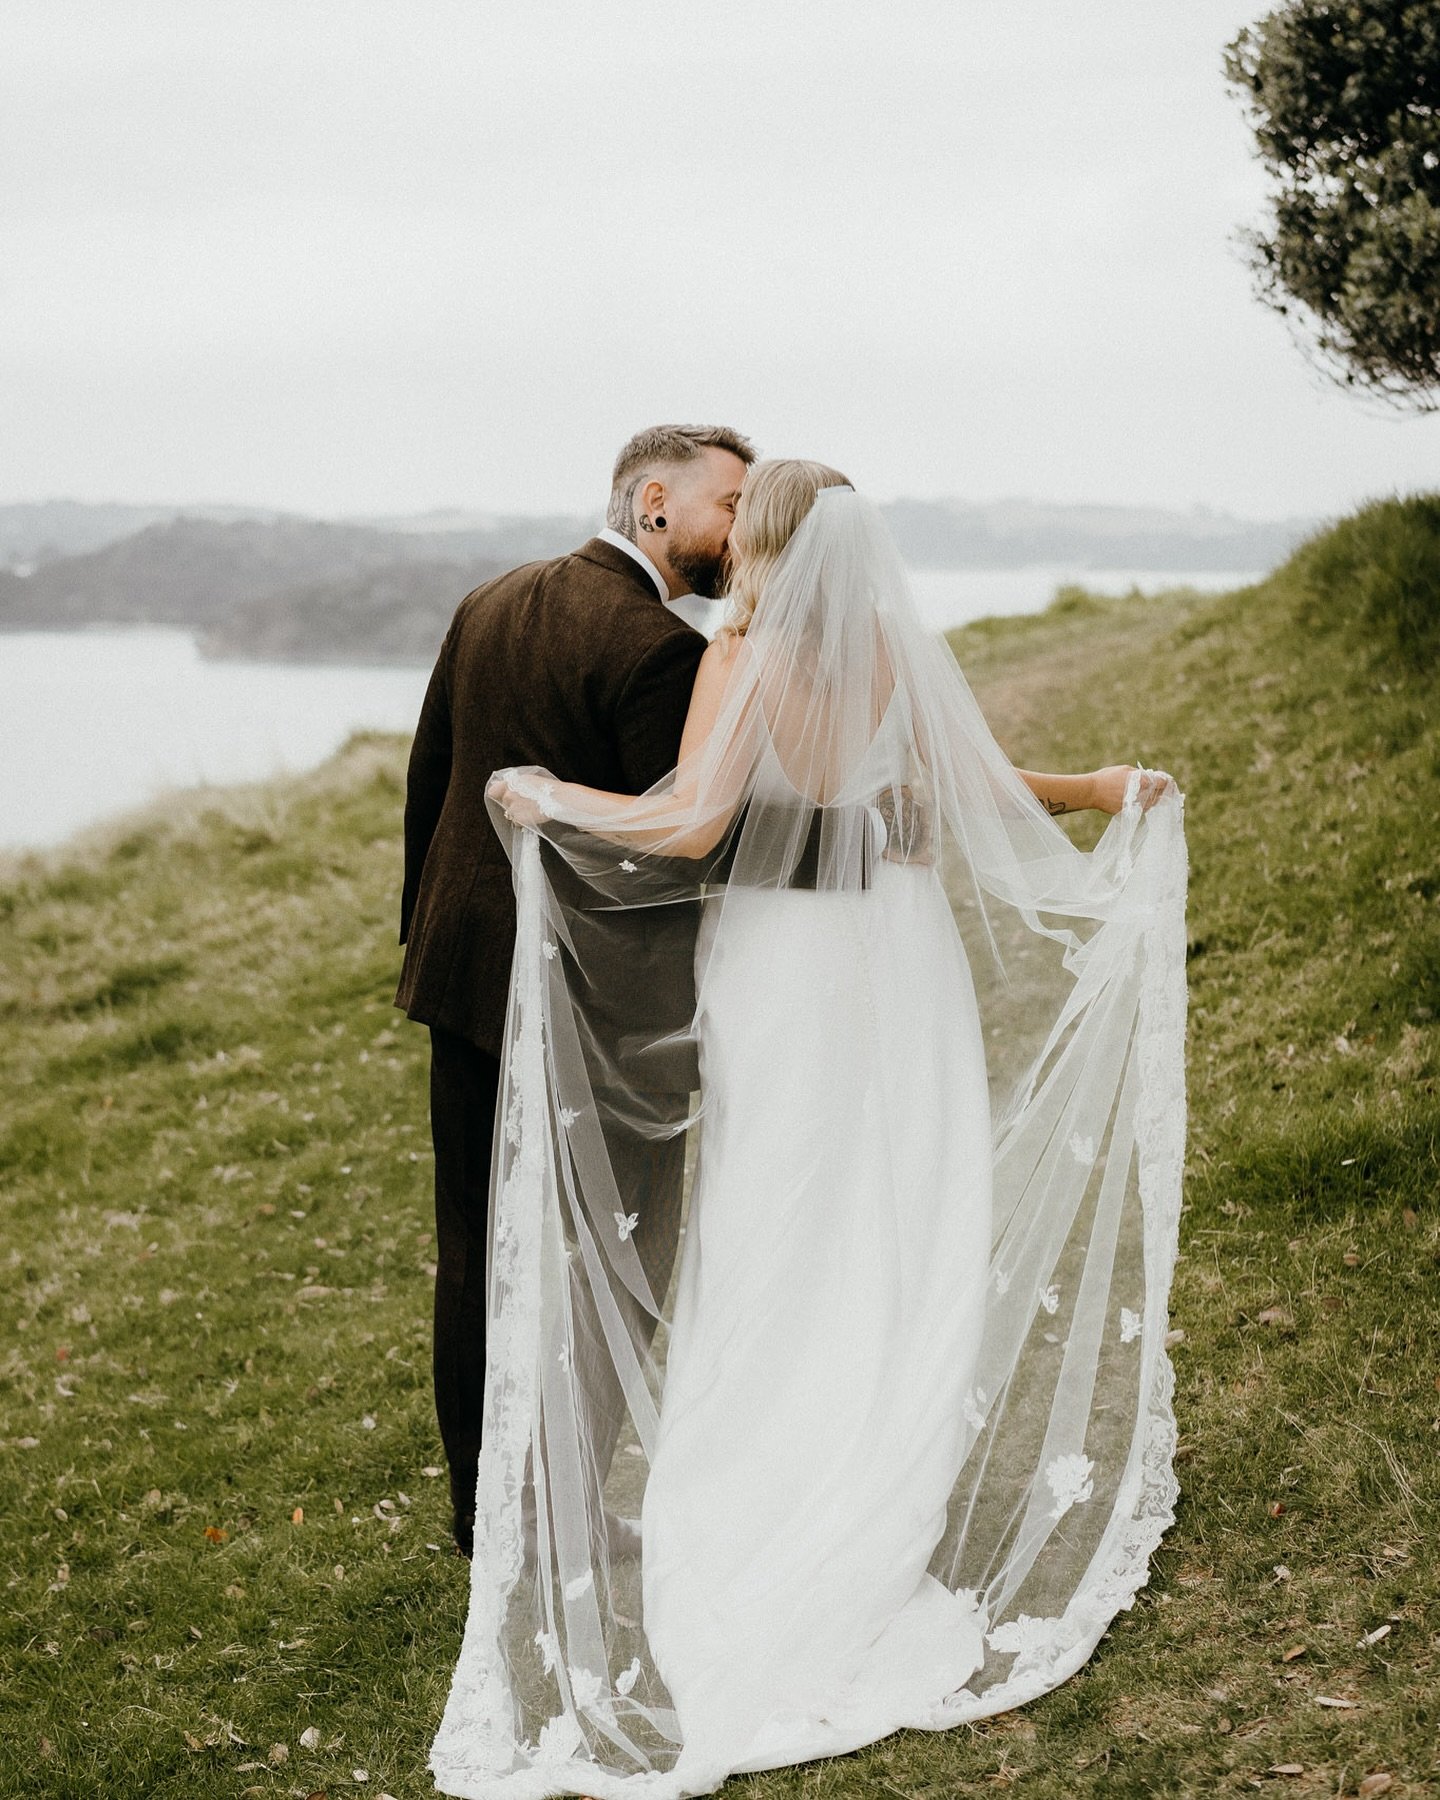 Absolutely beautiful set of images from Bella and Ethan&rsquo;s wedding, shot by my wonderful friend and incredibly talented photographer @stephbubble of @bubblerock, edited by me.

I&rsquo;m working on this gallery at the moment and it has been so e